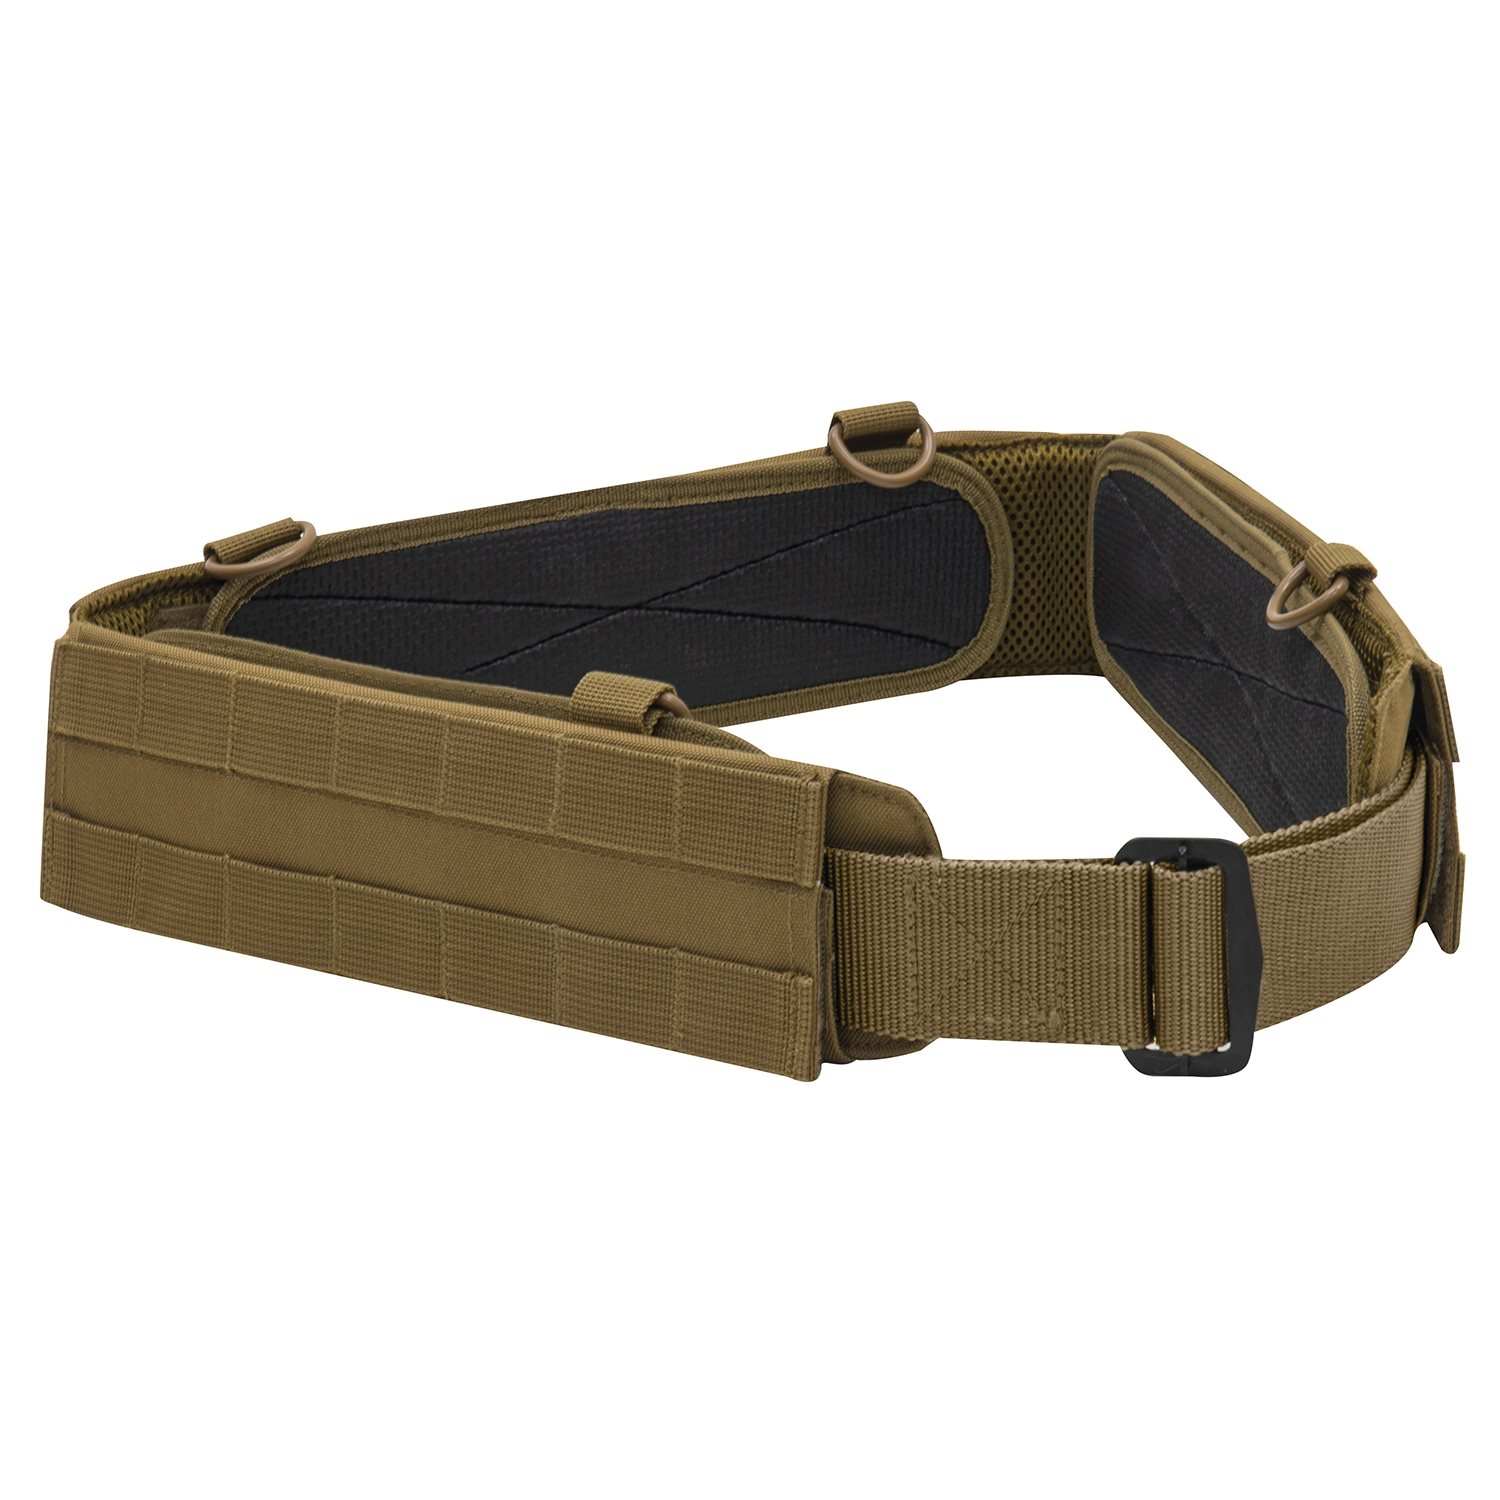 ROTHCO MOLLE Low Profile Tactical Battle Belt COYOTE | Army surplus ...